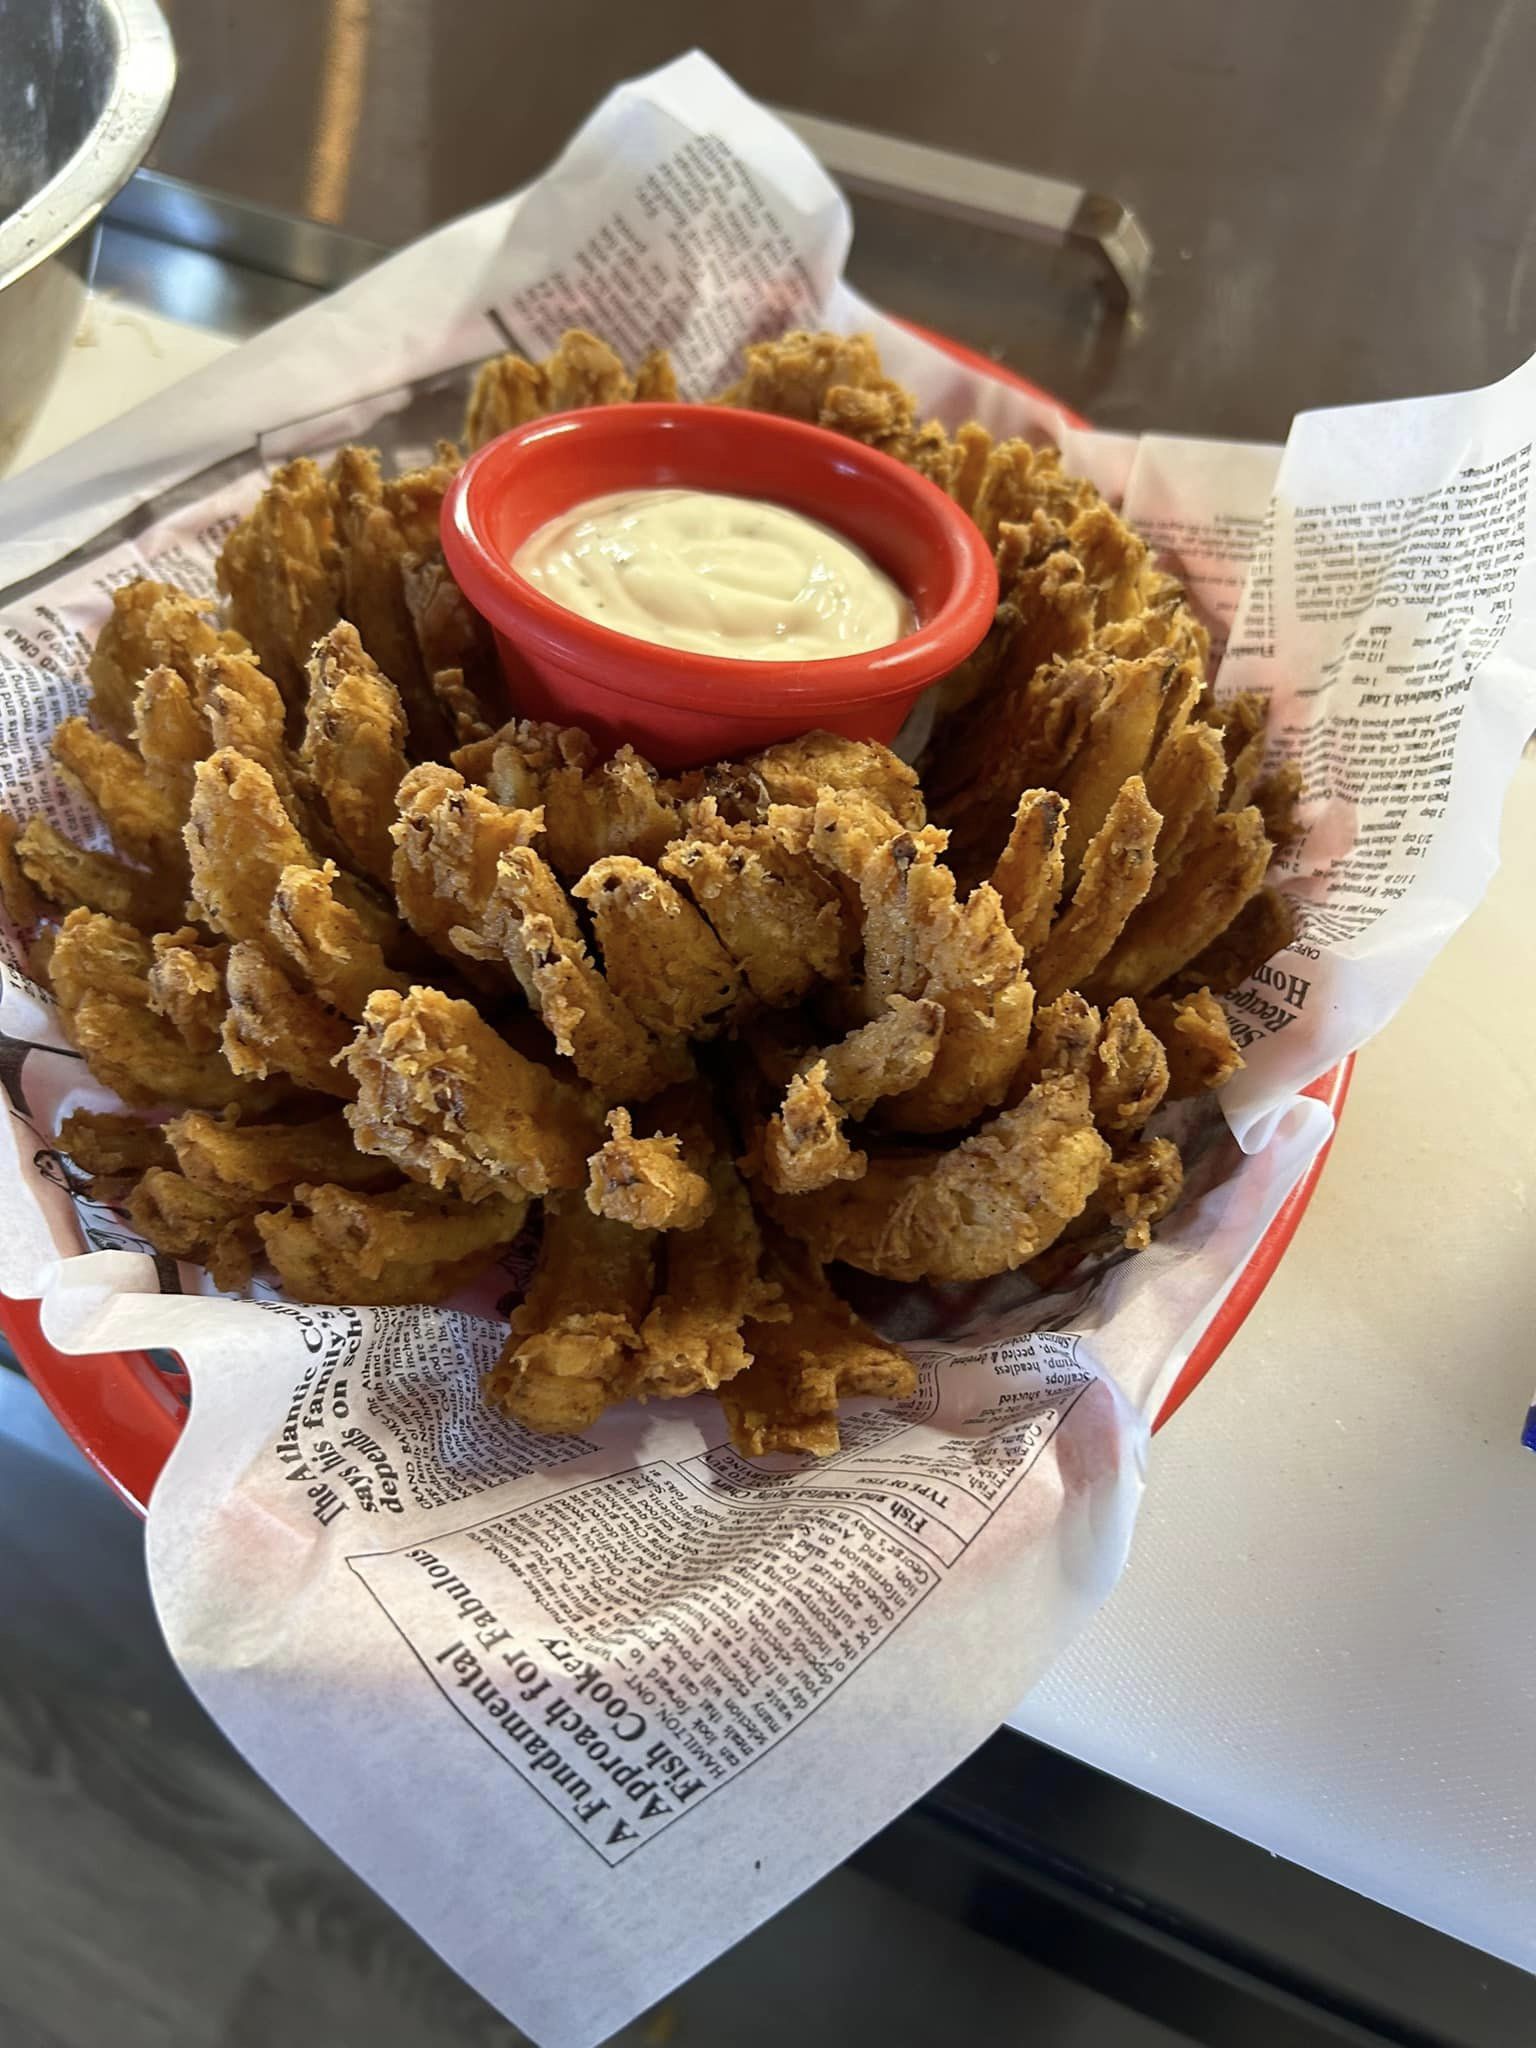 a deep fried bloomin' onion served in a paper lined basket with a bowl of dip in the center.